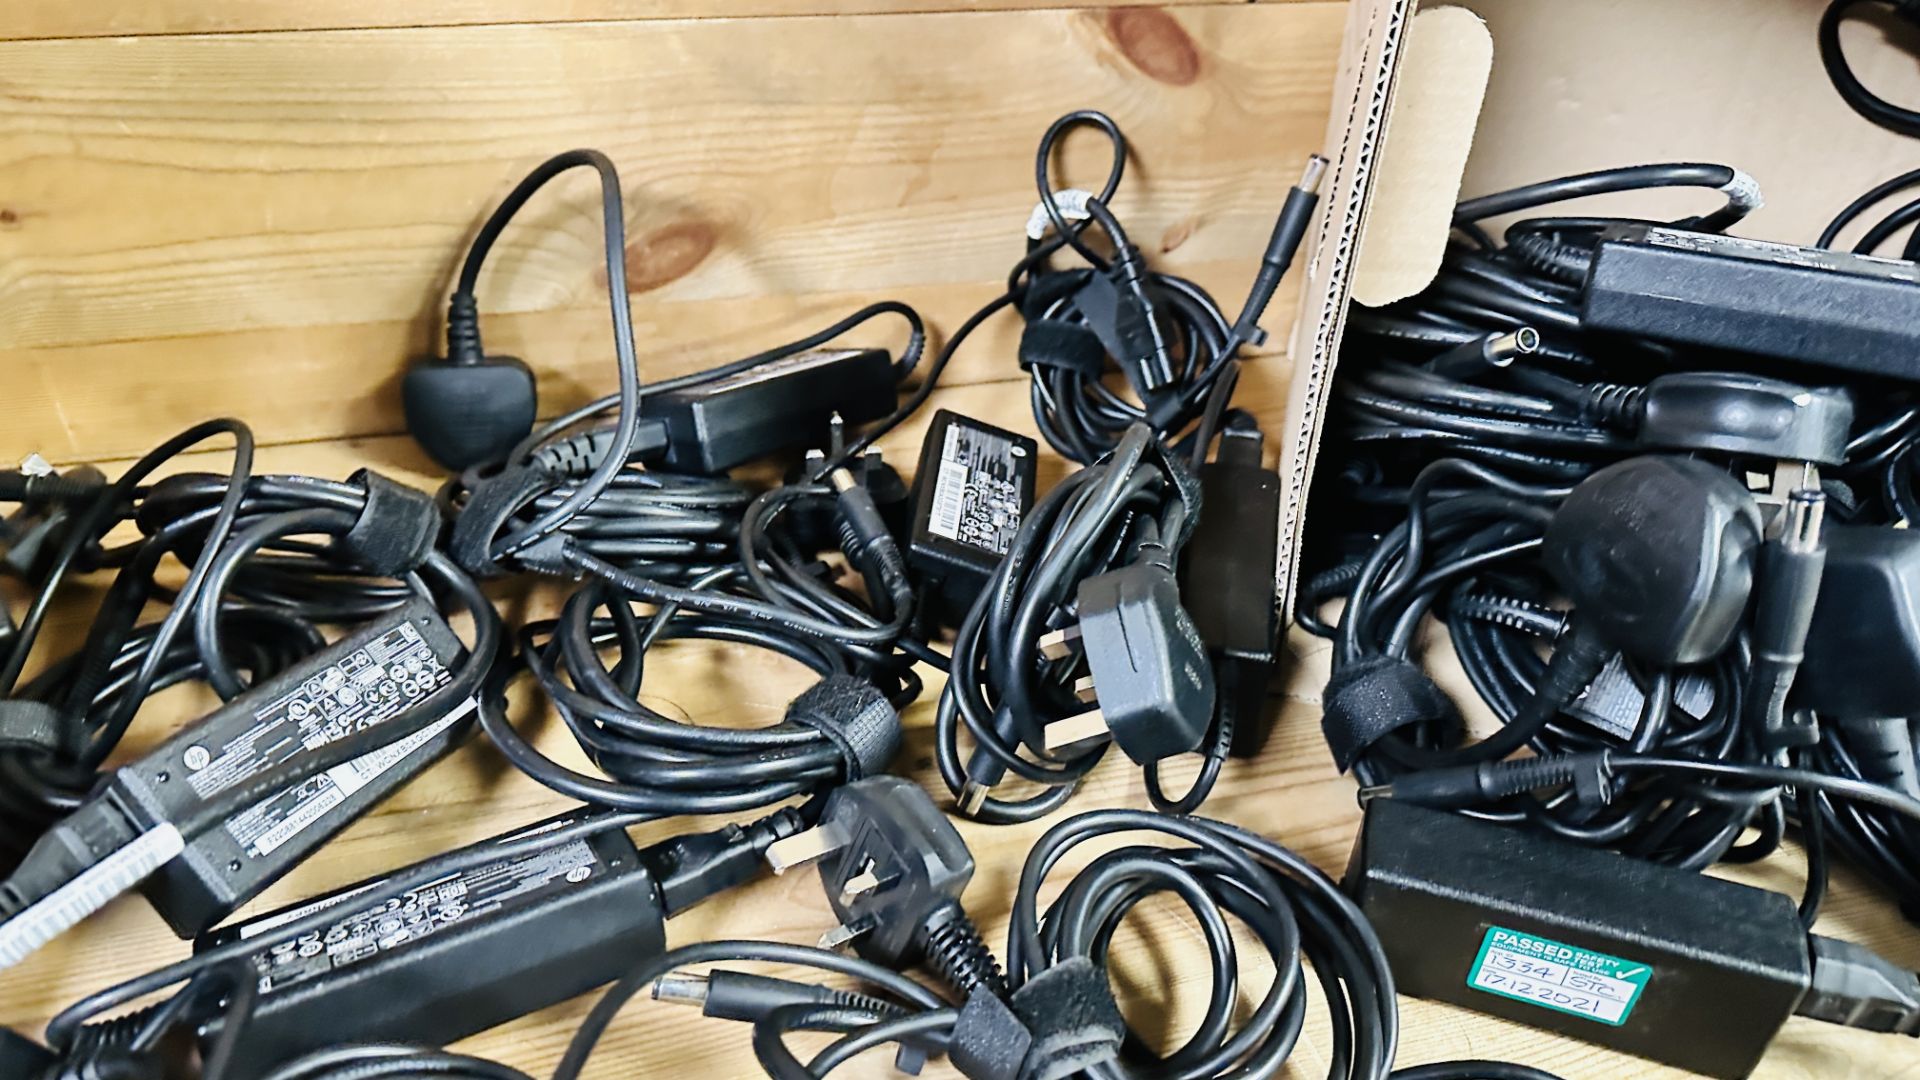 36 X LAPTOP CHARGERS FOR HP LAPTOPS MANY HP 65W EXAMPLES - SOLD AS SEEN. - Image 6 of 9